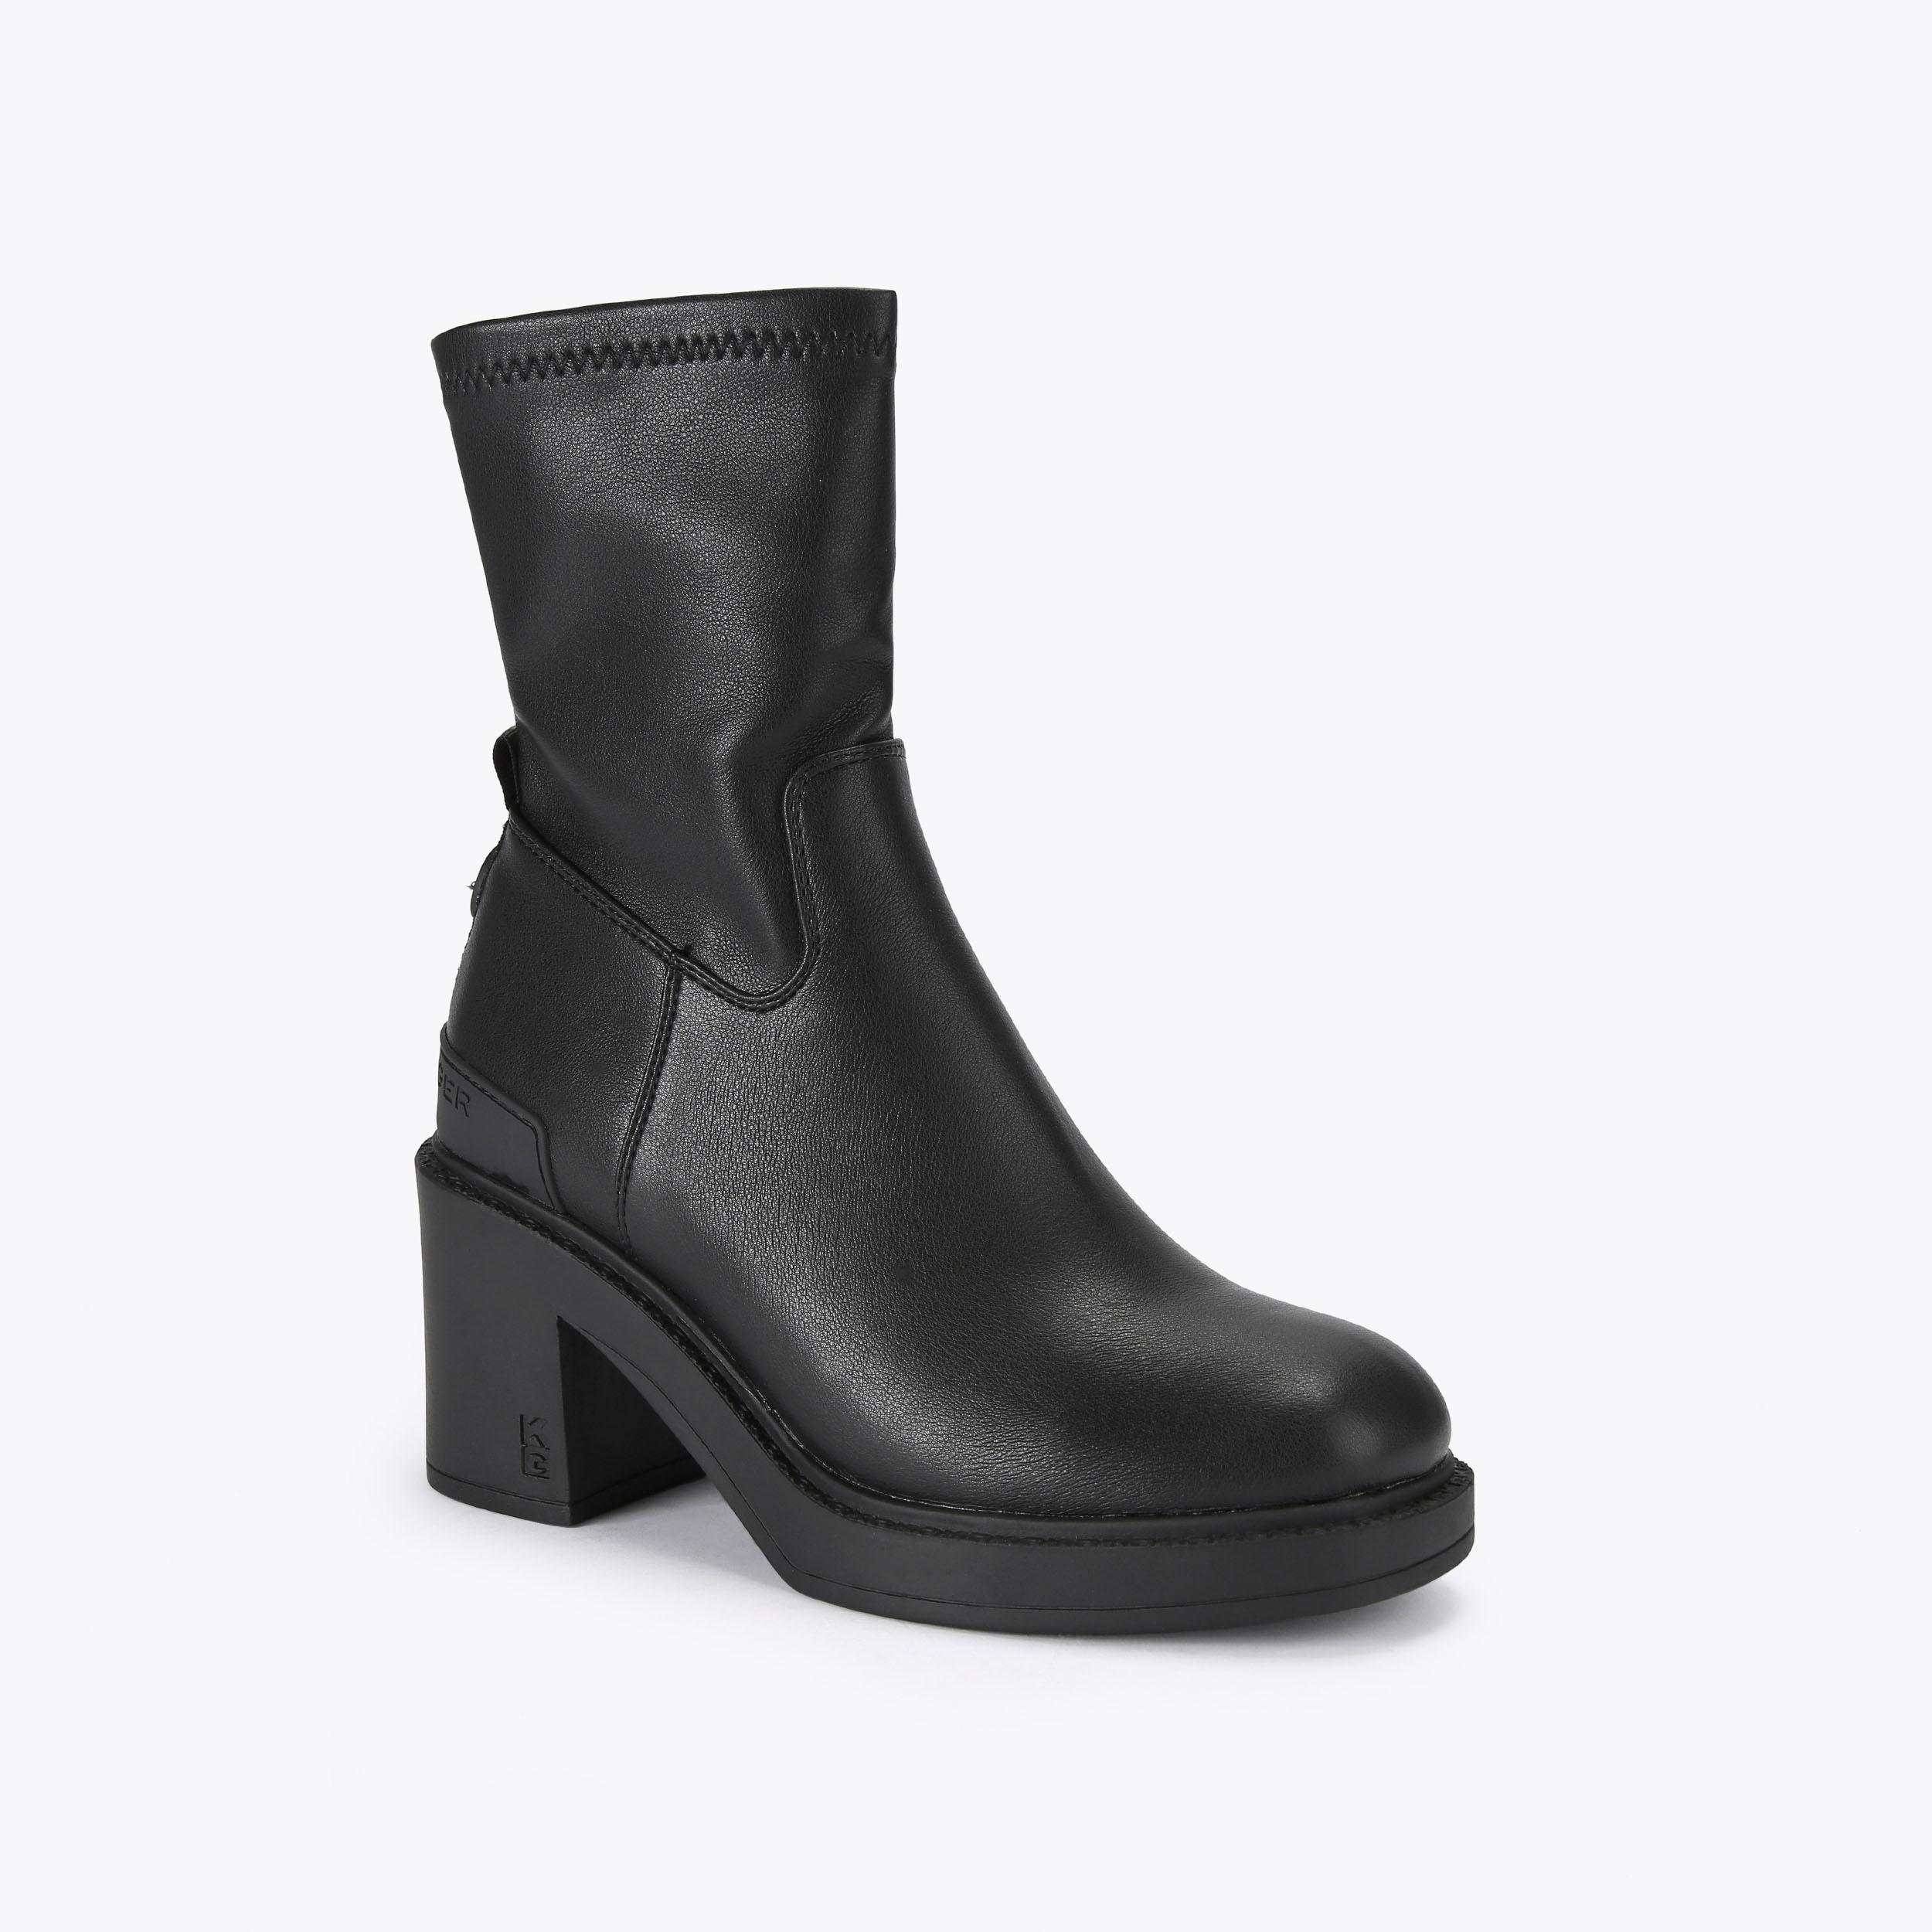 TATE Black Ankle Boots by KG KURT GEIGER